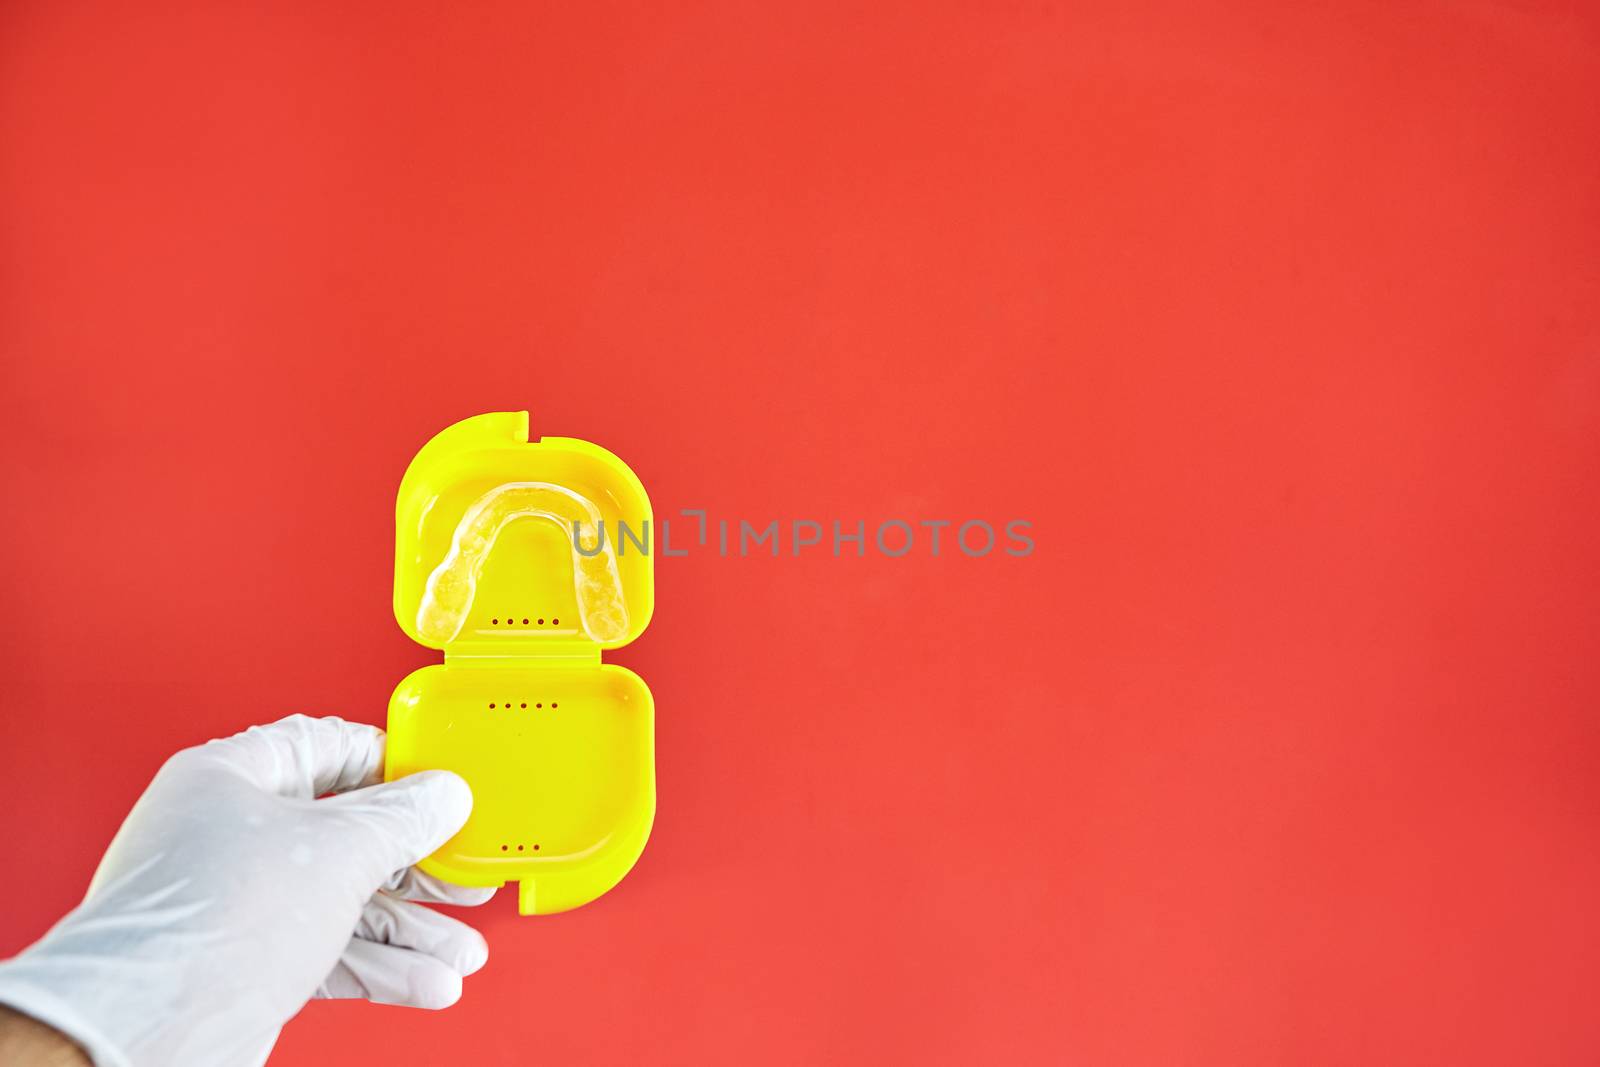 Invisible bracelets in a yellow case on a red background held in one hand by a latex glove by Daniel_Mato